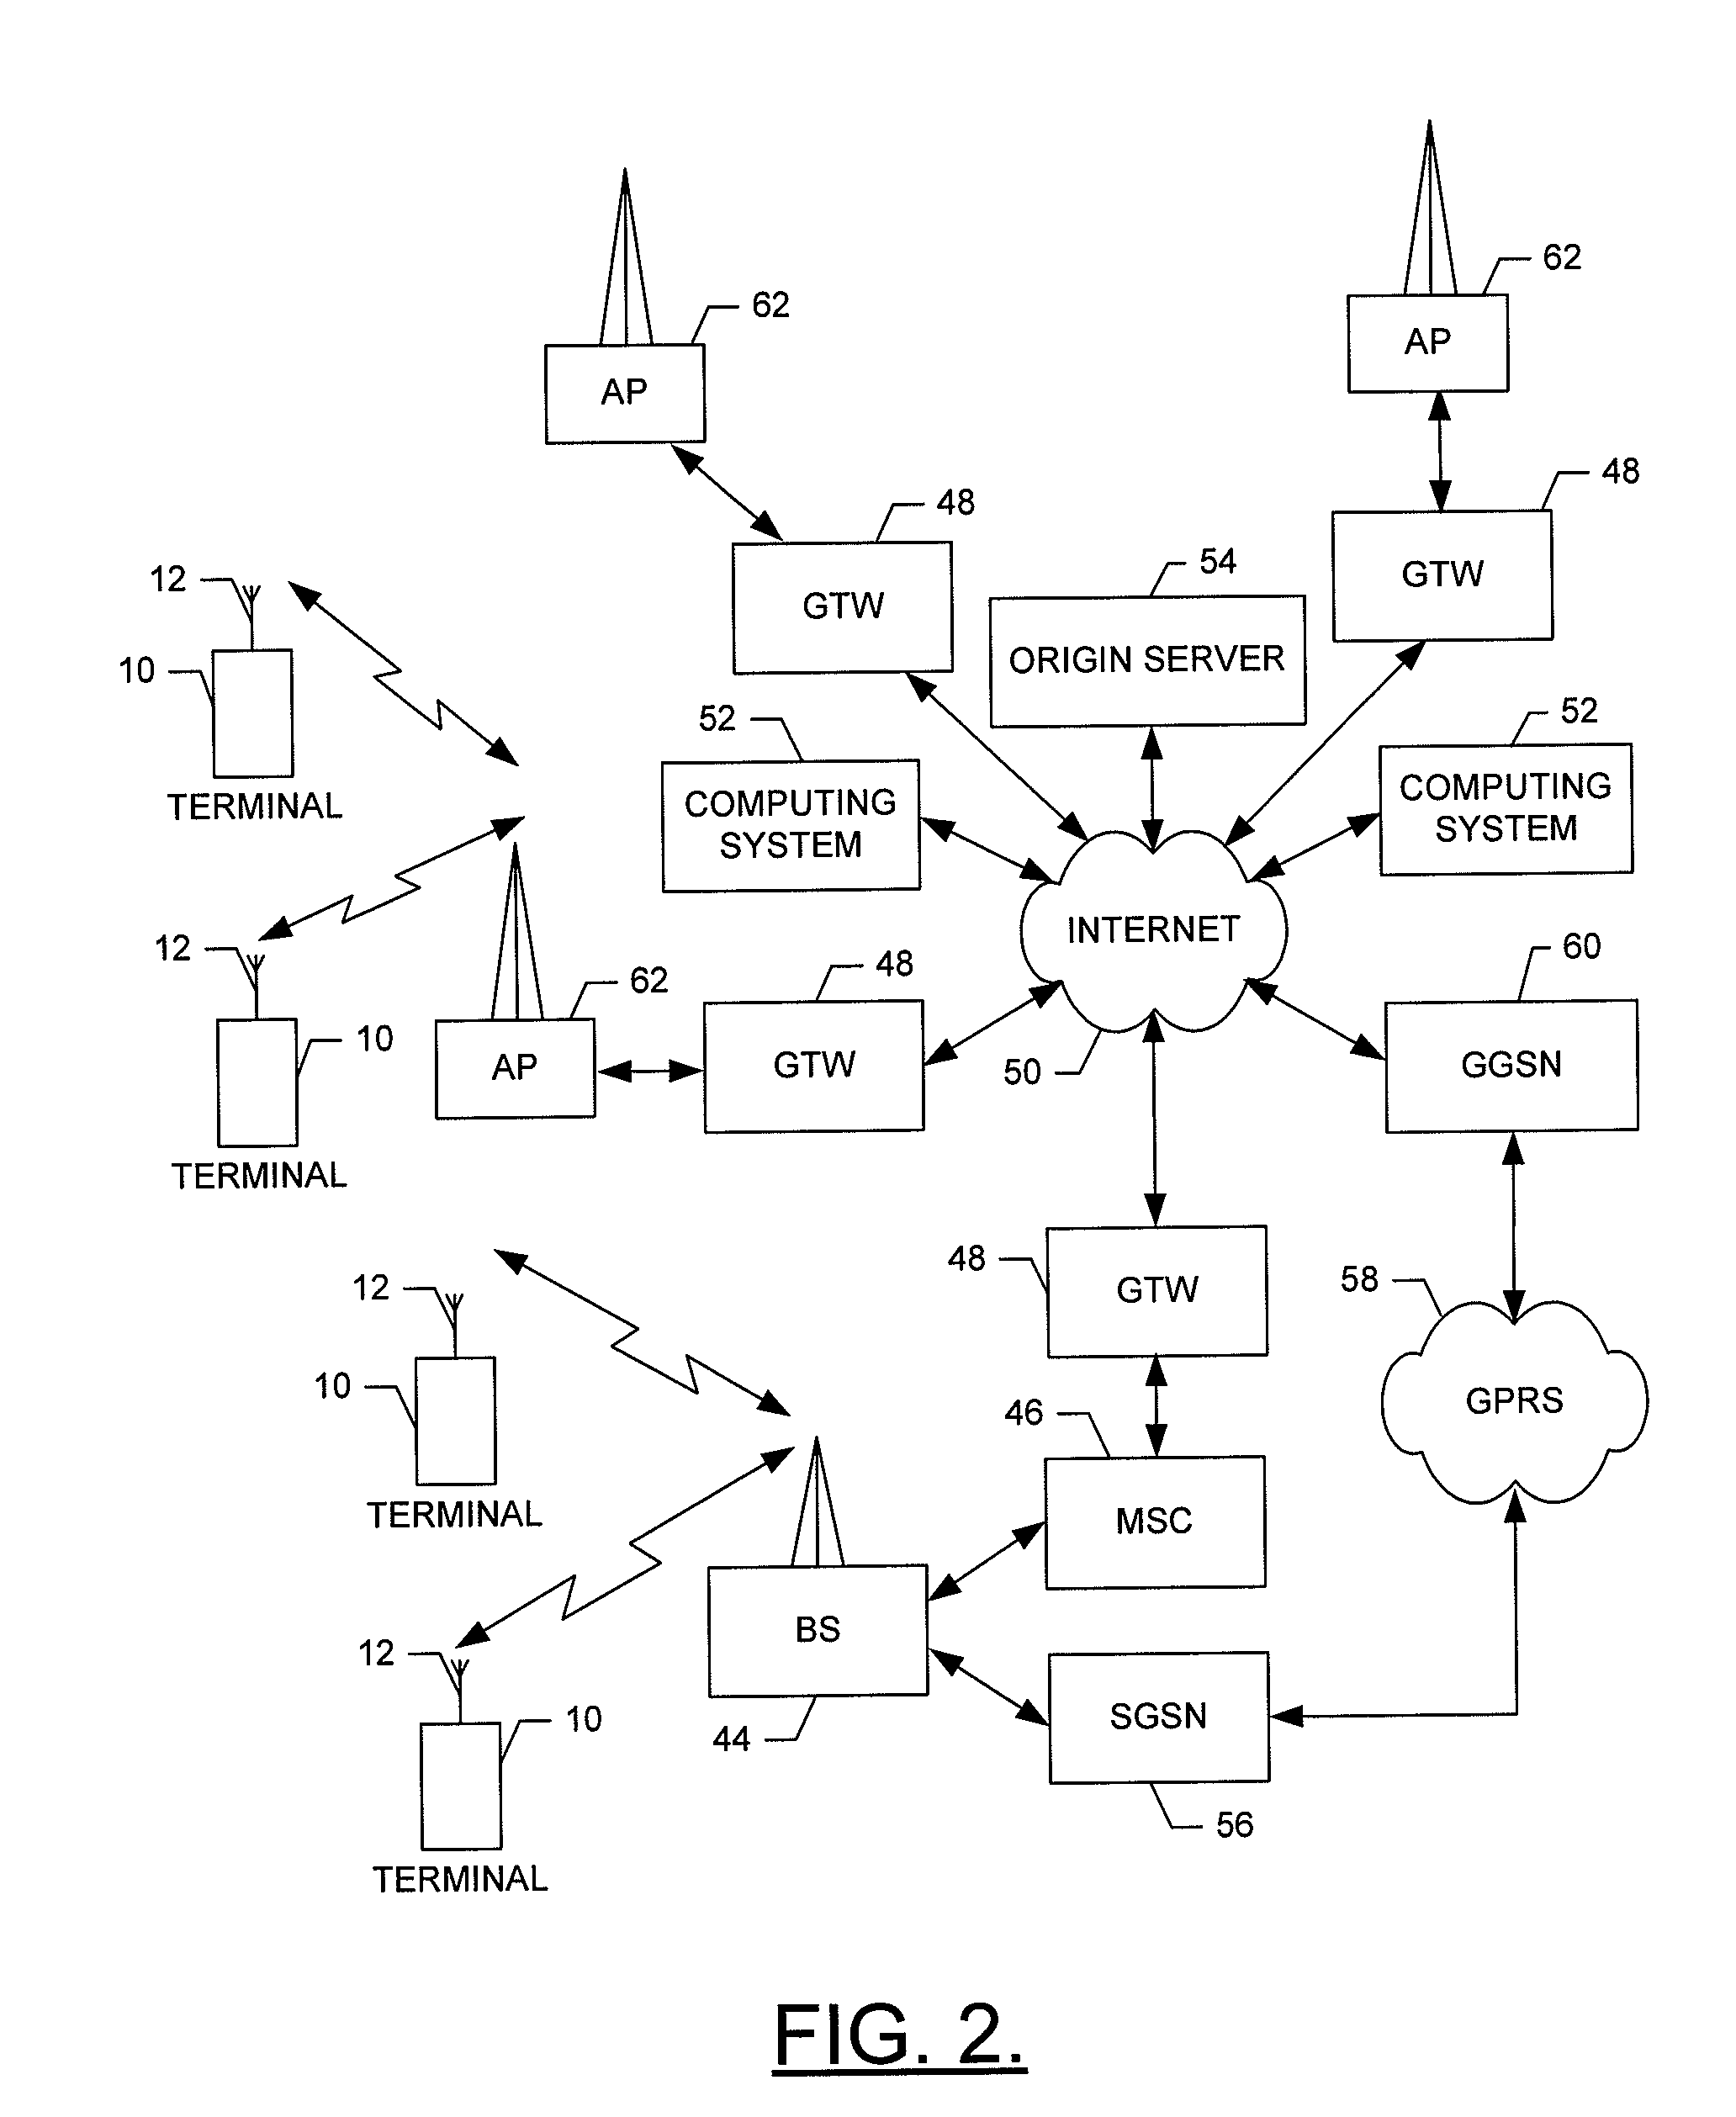 Method, apparatus and computer program product for providing correlations between information from heterogenous sources